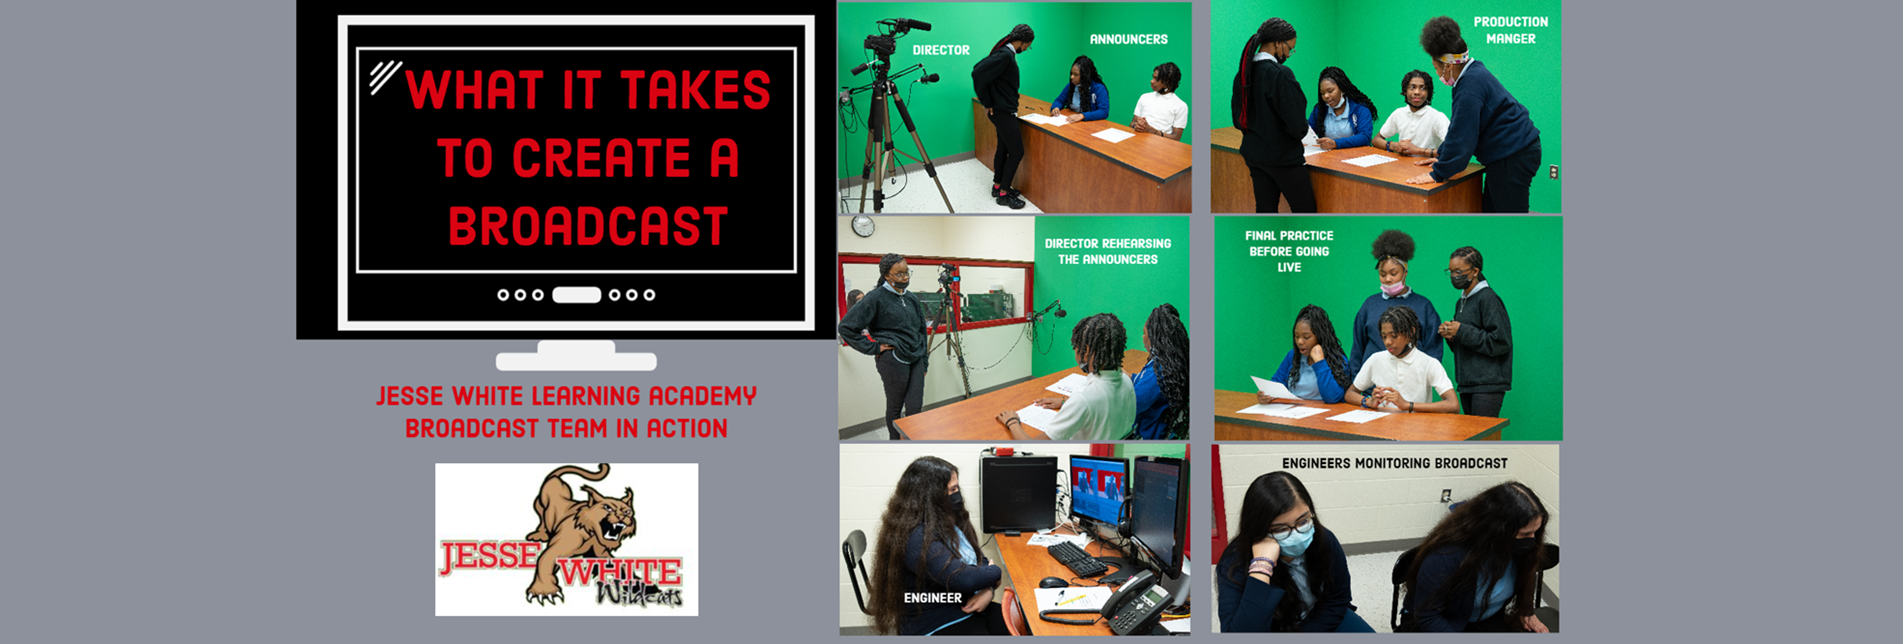 Jesse White Learning Academy Broadcast Team in Action